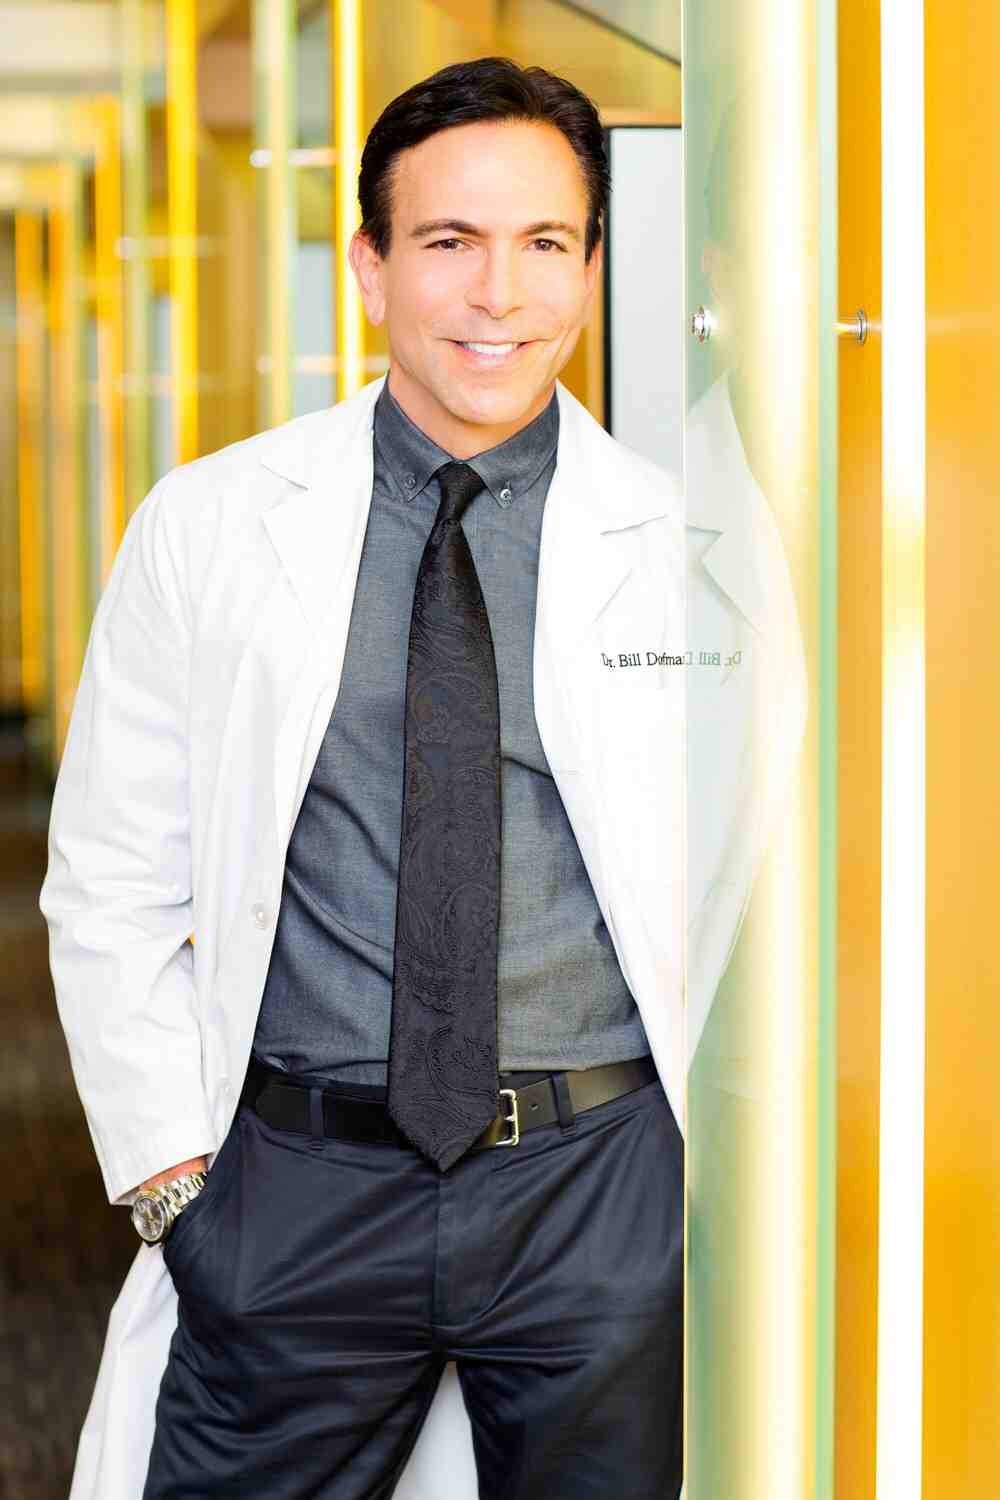 Who is the best cosmetic dentist in Los Angeles?